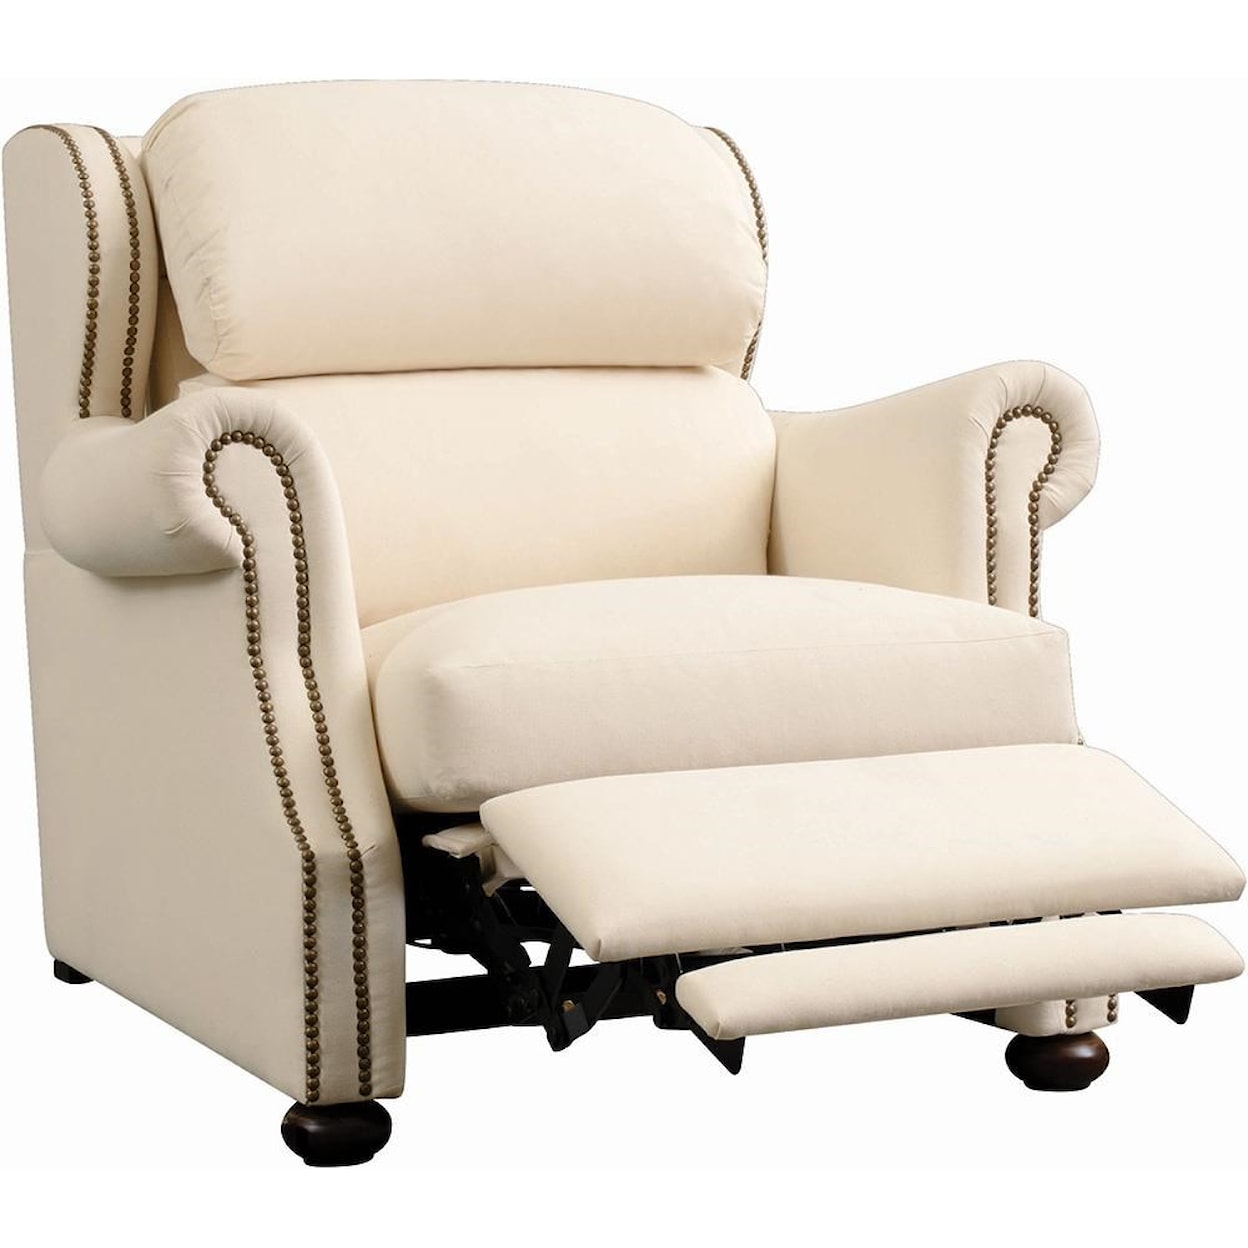 Stickley Stickley Fine Upholstered Chairs Durango Power Fabric Recliner